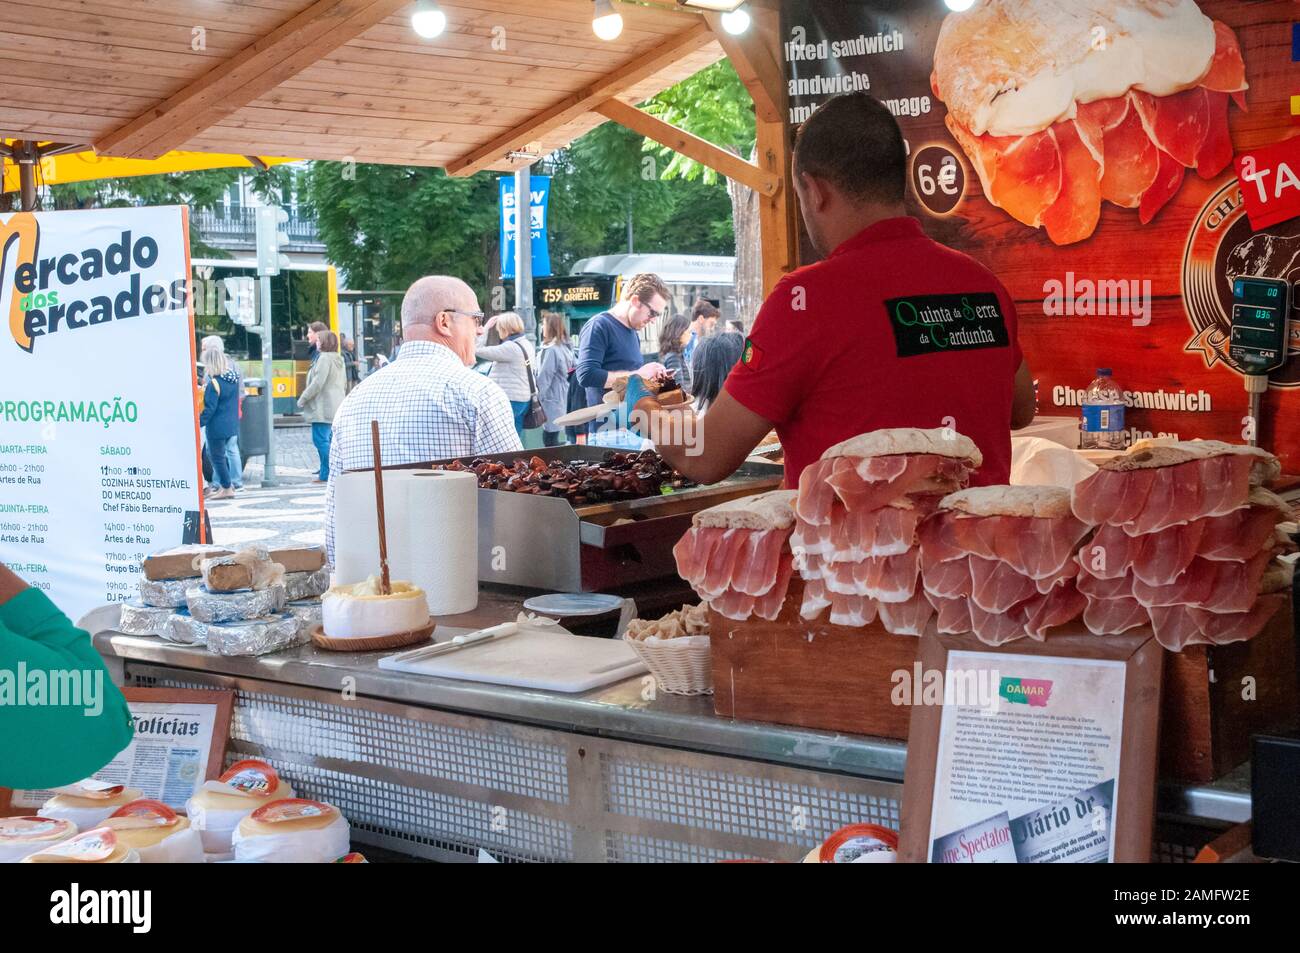 Food stalls in an outdoor Sunday market in Rossio Square, Lisbon, Portugal Stock Photo